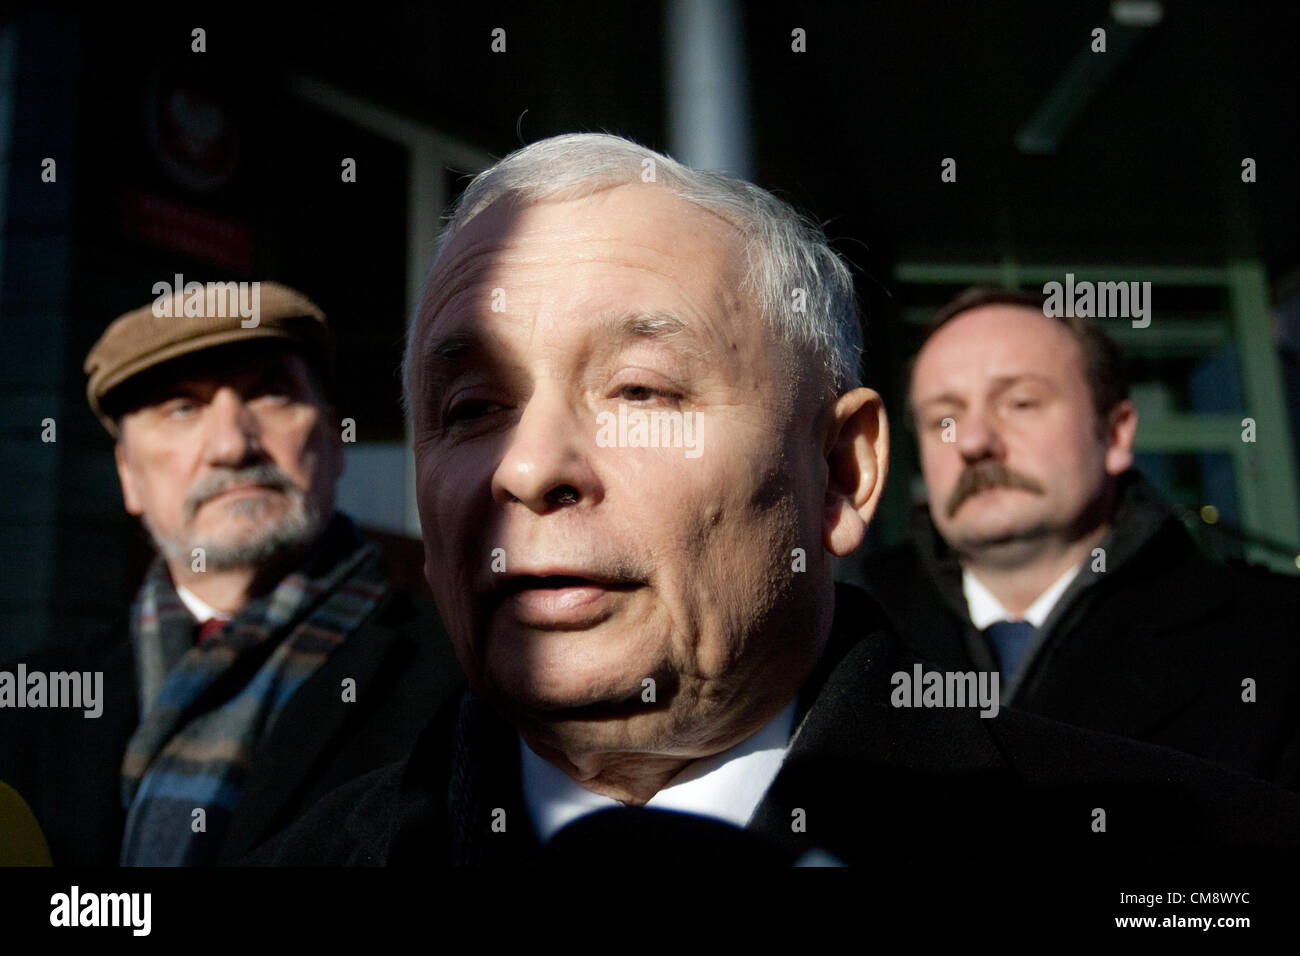 Warsaw, Poland. 30th October 2012. Press Conference after one of the Polish daily newspapers claimed that gunpowder and explosives trails were found in the polish presidential jet that crashed in Smolensk in 2010. On the Picture Jaroslaw Kaczynski - former prime minister and brother of President Lech Kaczynski who died in the Smolensk accident (C) , former minister of interior Antoni Macierewicz (L)  just left the general prosecutor office. Credit:  Krystian Maj / Alamy Live News Stock Photo